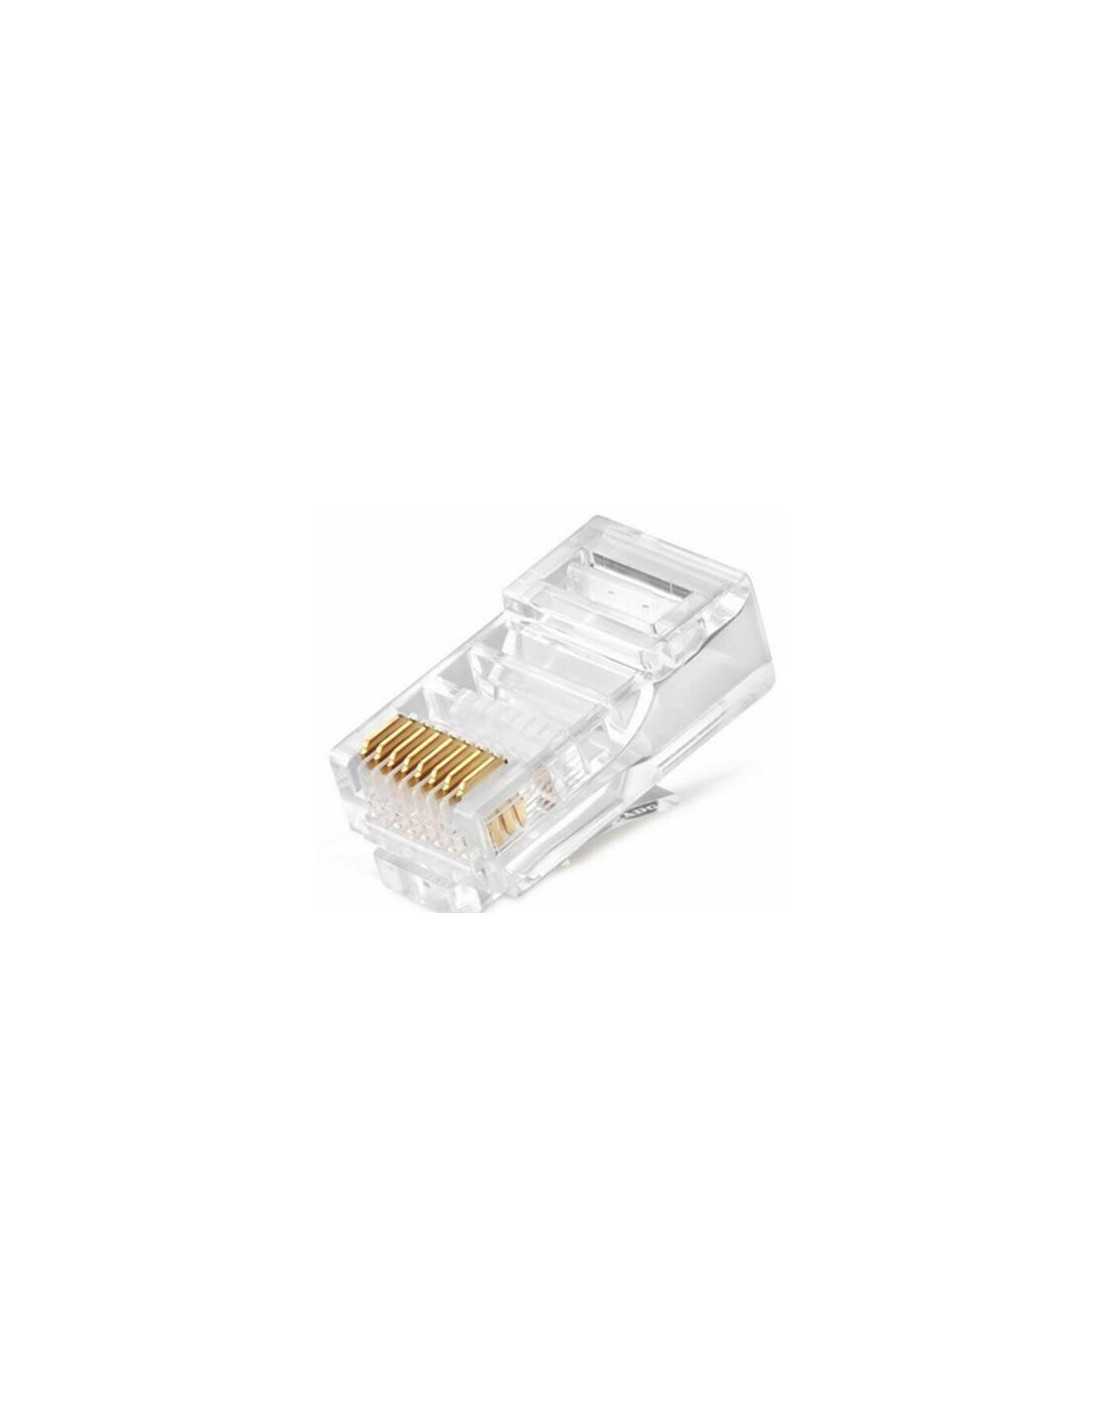 Connettore RJ45 Bticino Living Now toolless UTP cat6A bianco KW4279C6A